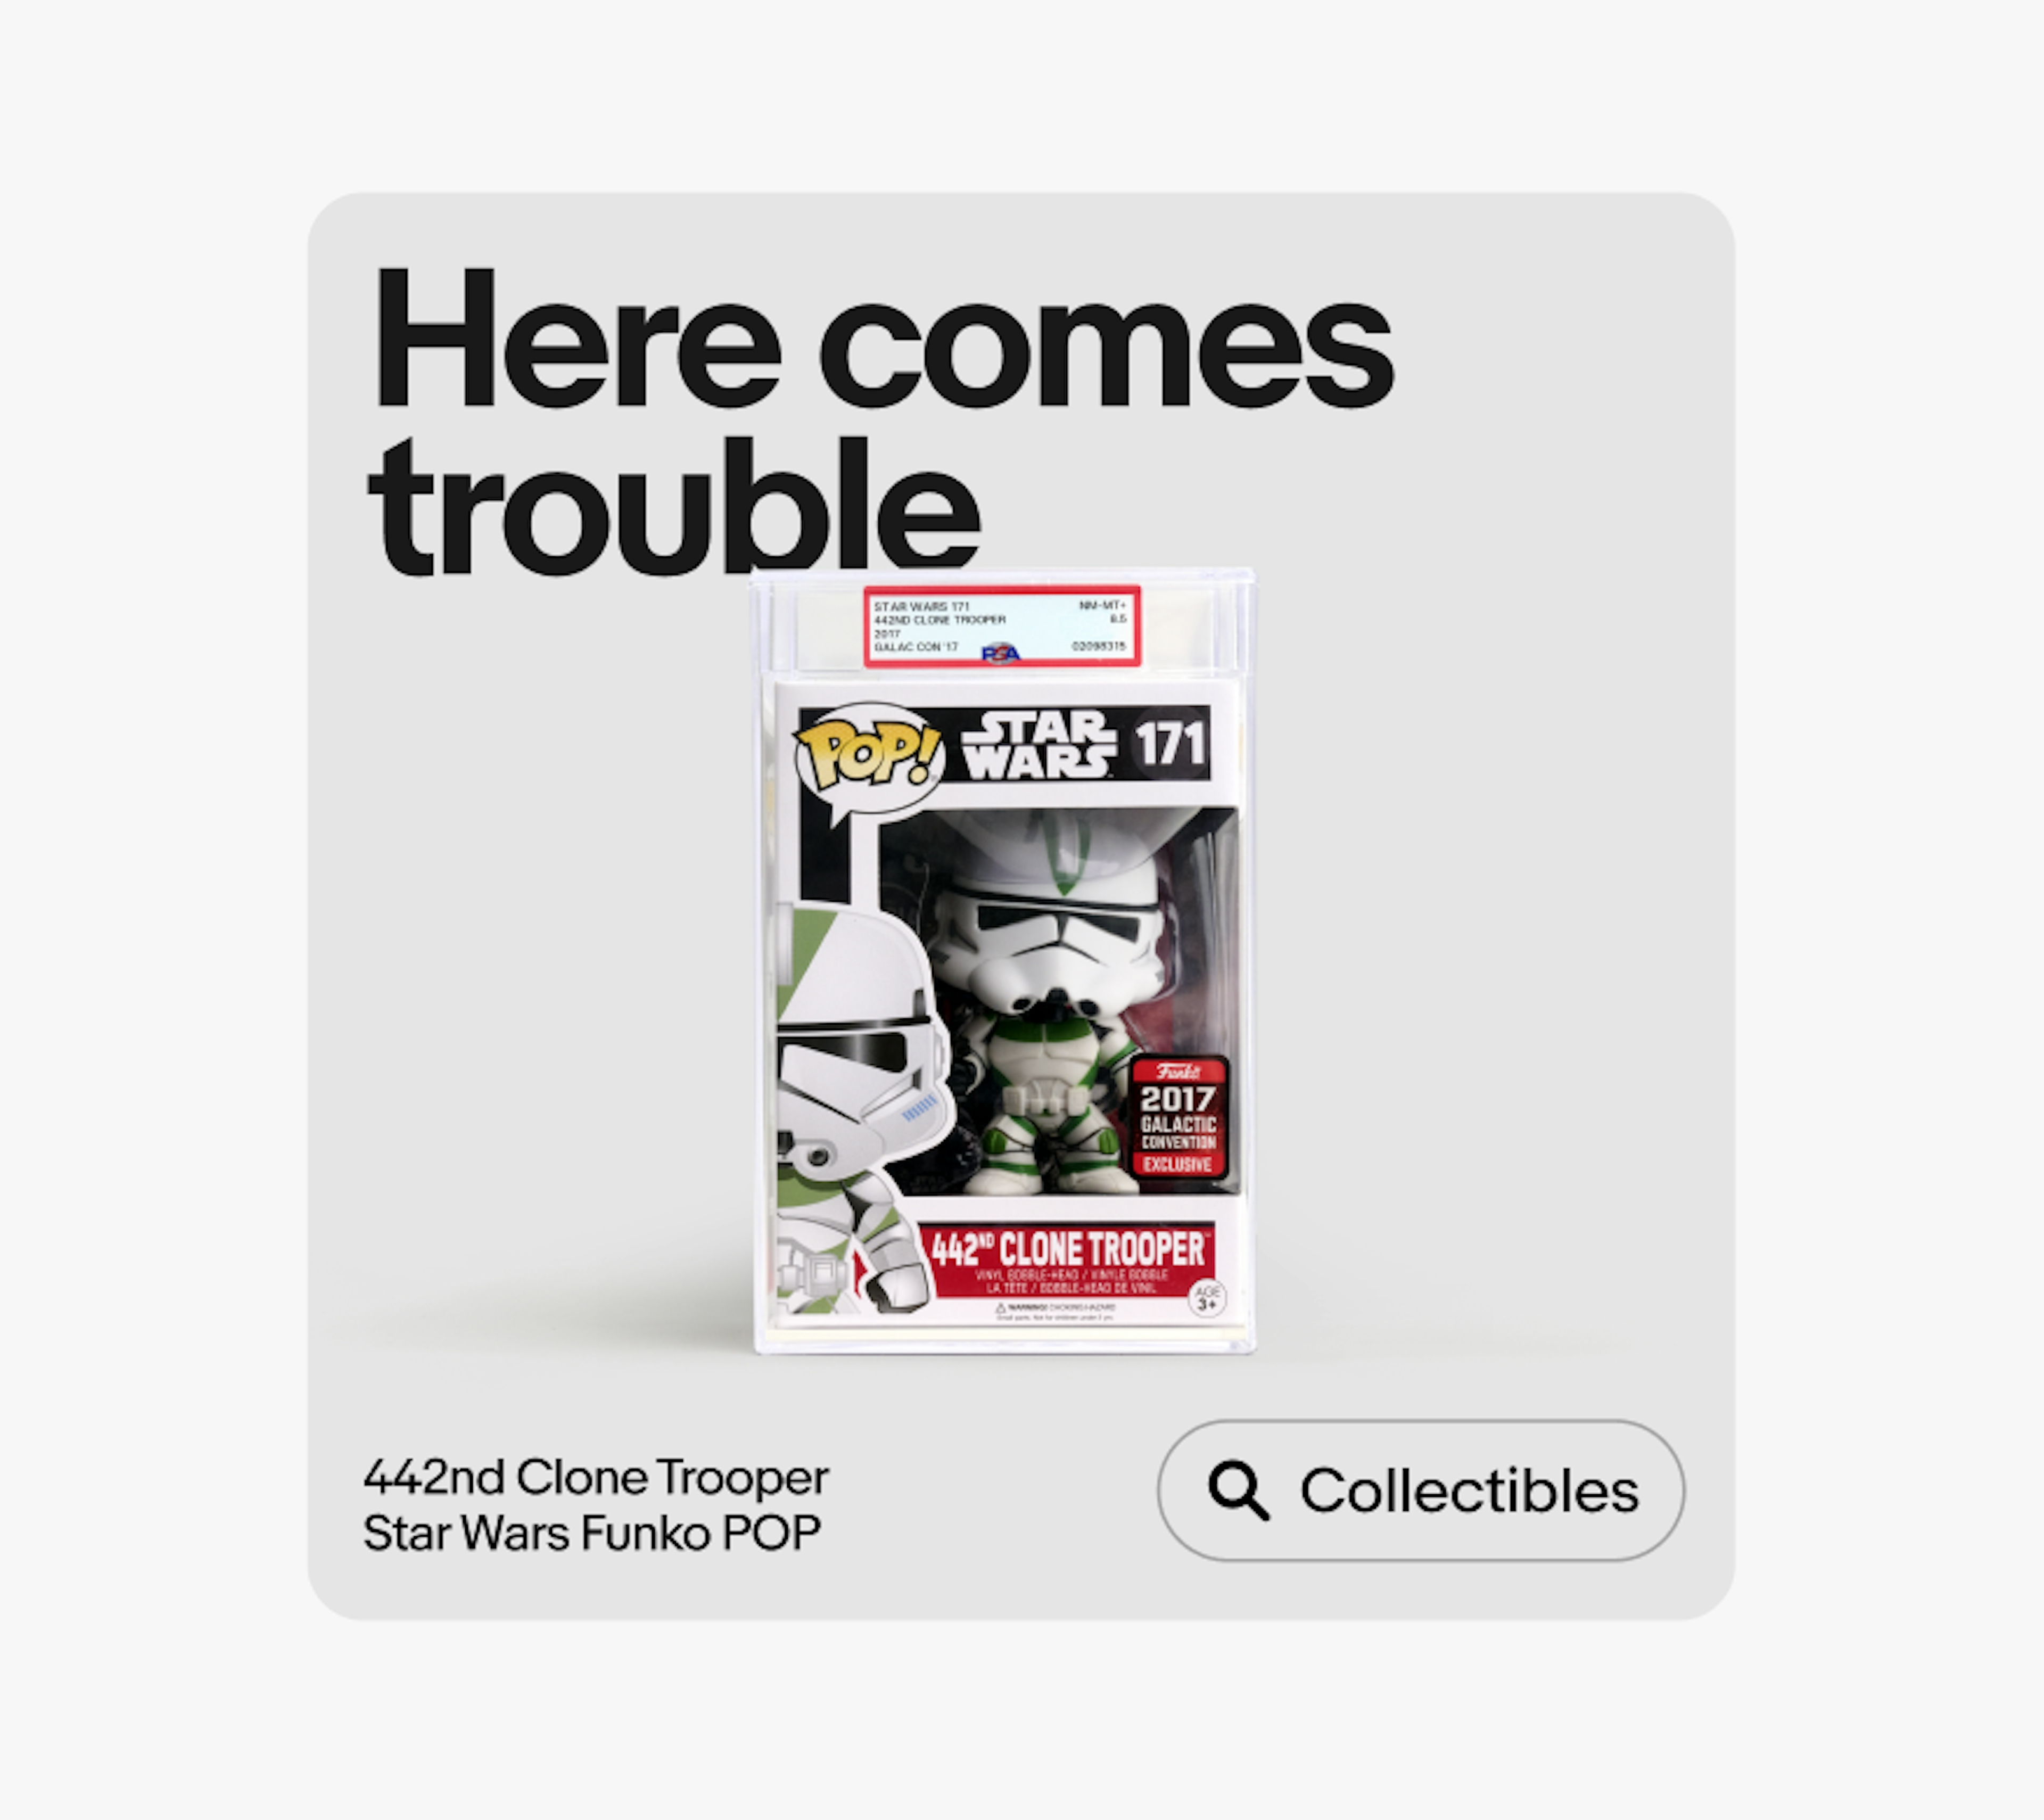 A social post of a 442nd Clone Trooper Star Wars Funko POP figure in its box, labeled "Here comes trouble" with a search option for "Collectibles."